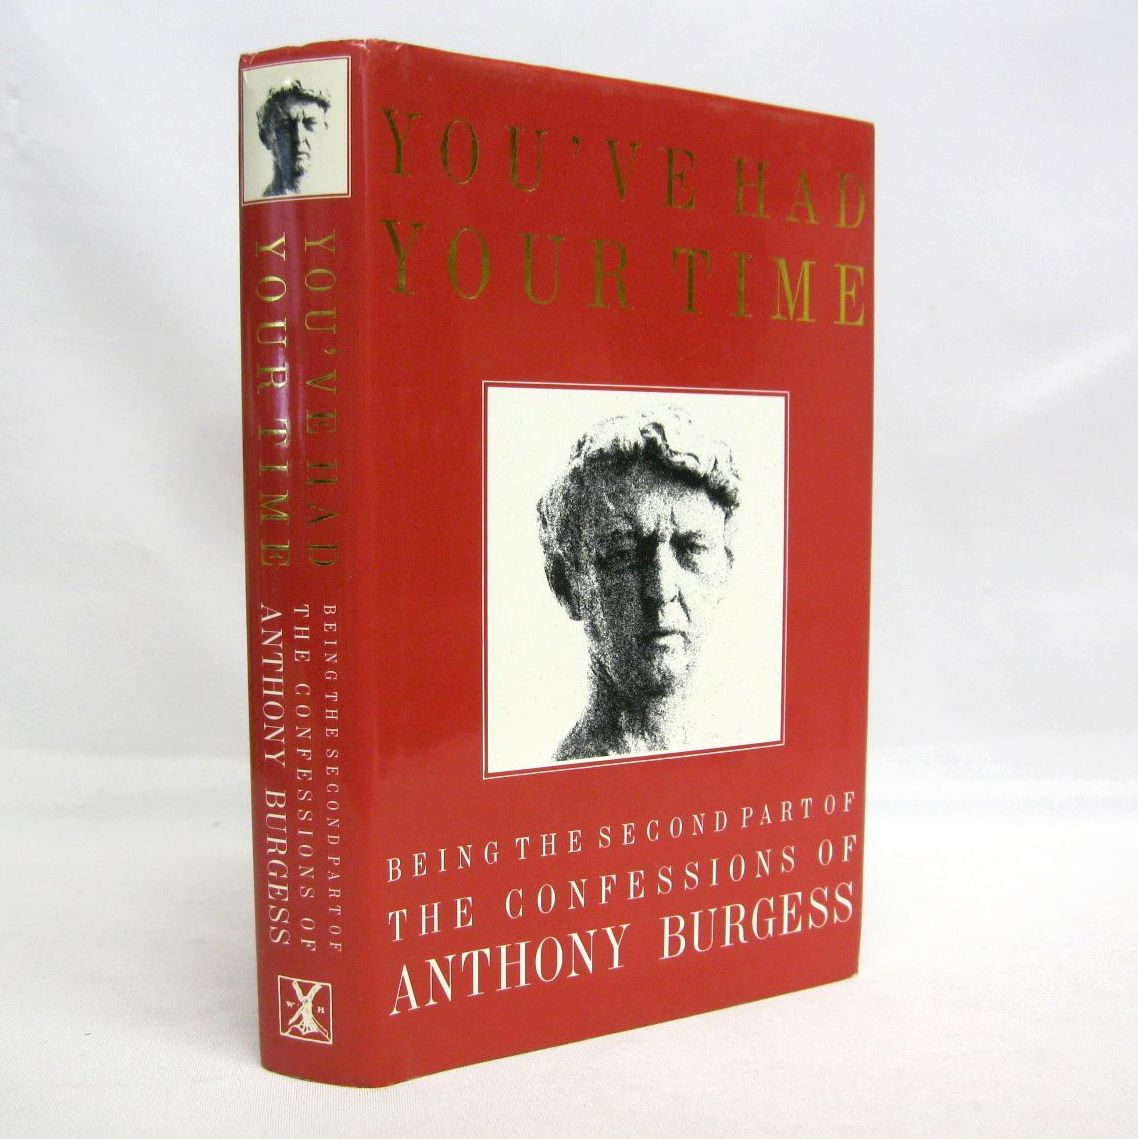 You've Had Your Time, Being the Second Part of the Confessions of Anthony Burgess